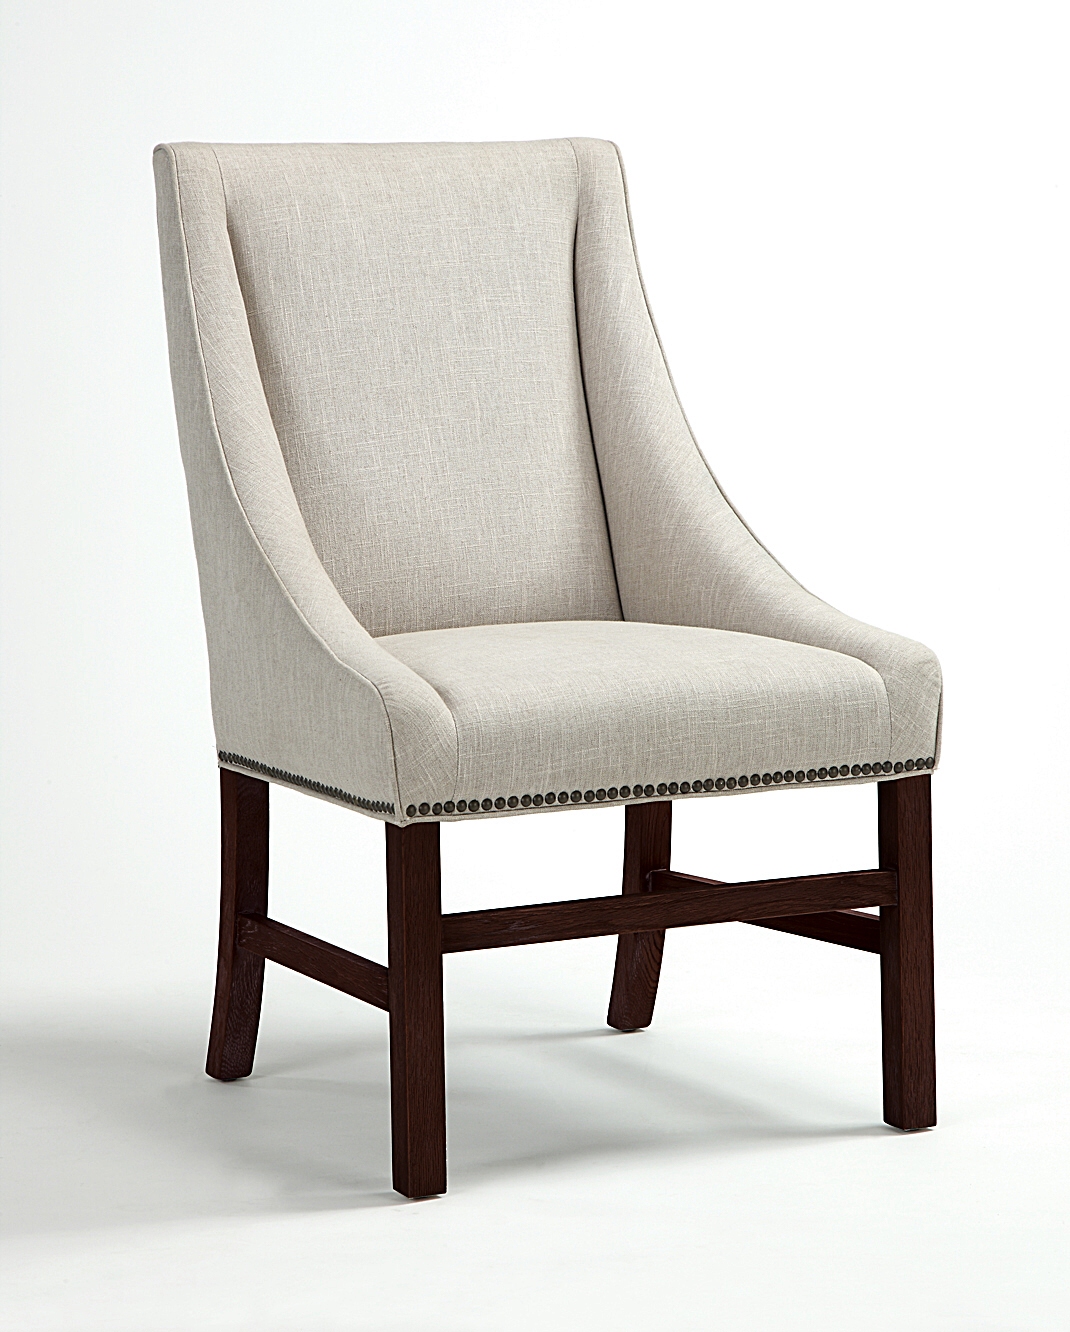 upholster dining chair photo - 2